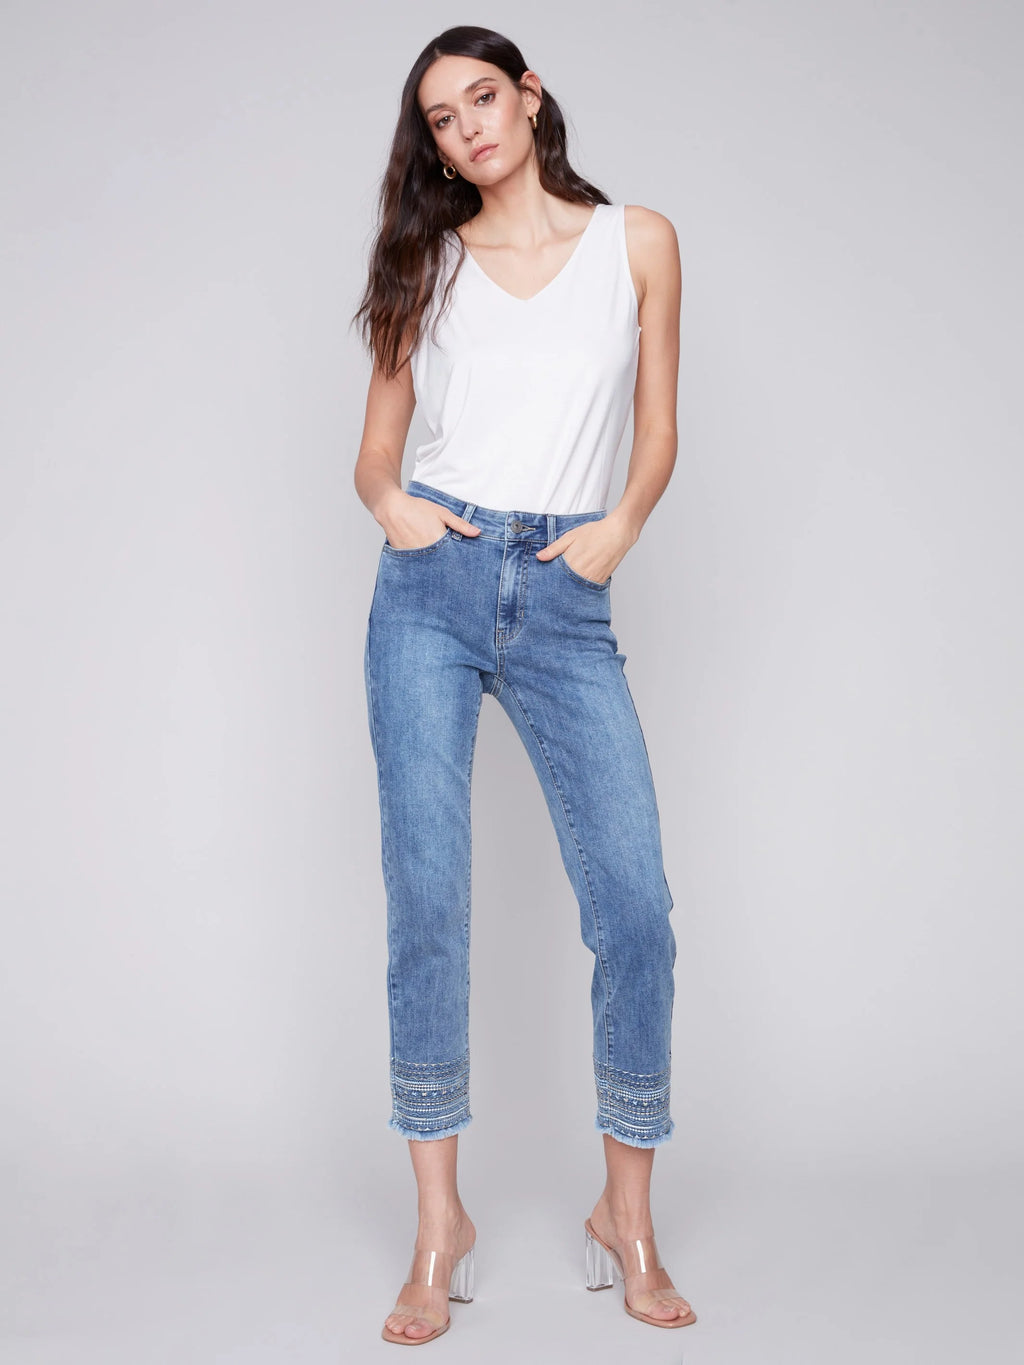 Charlie B Stretch Denim Ankle Pant with Embroidered Hem